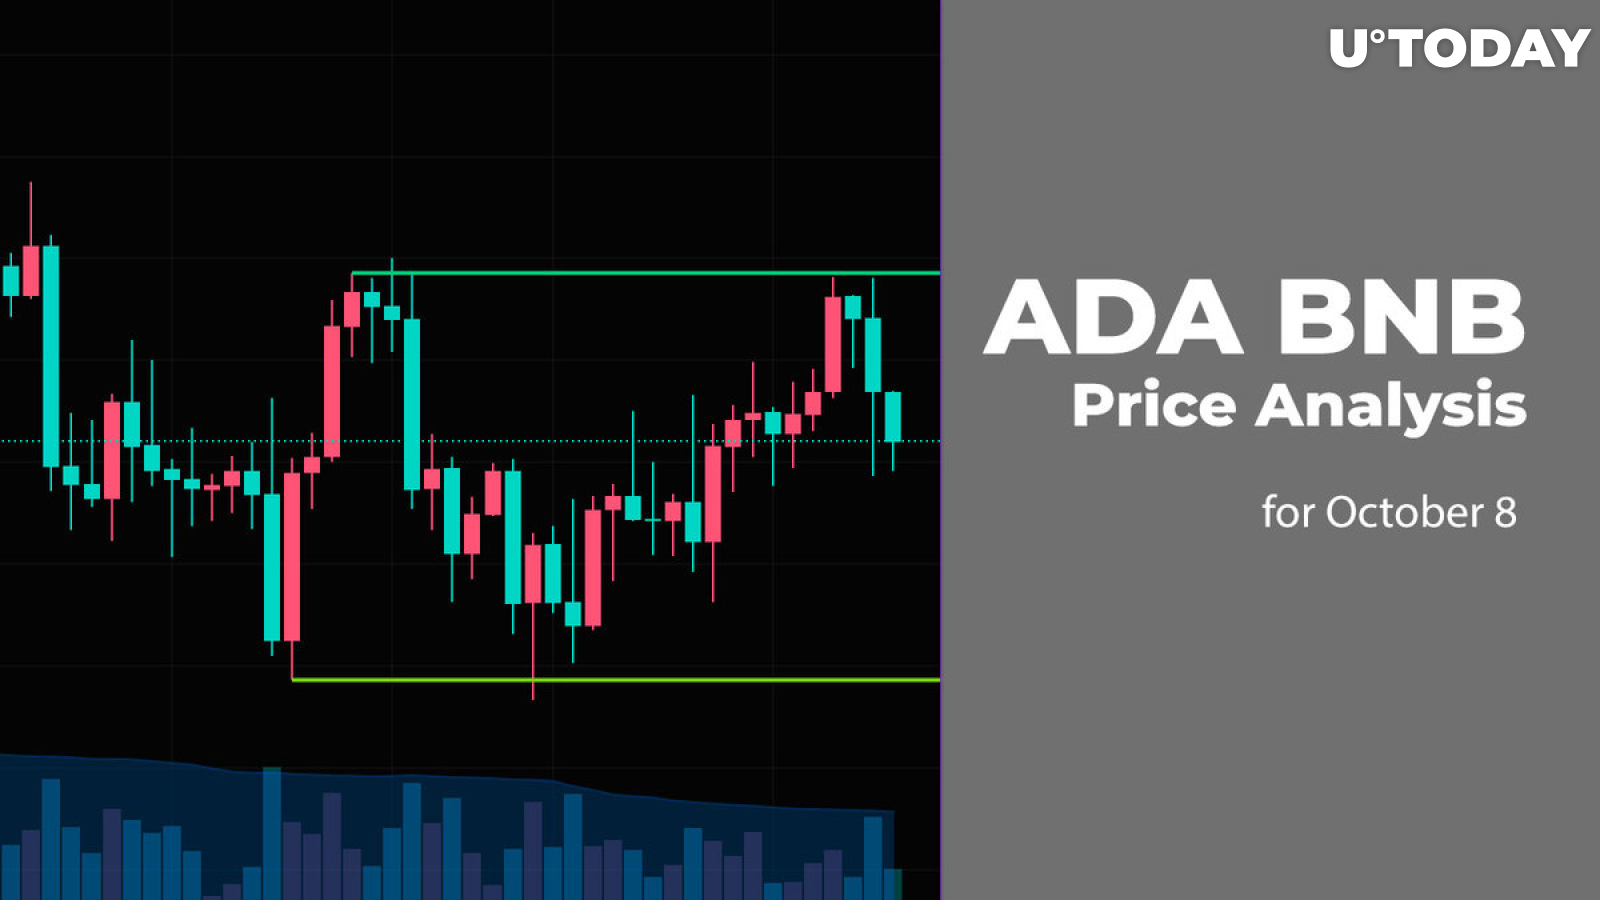 ADA and BNB Price Analysis for October 8